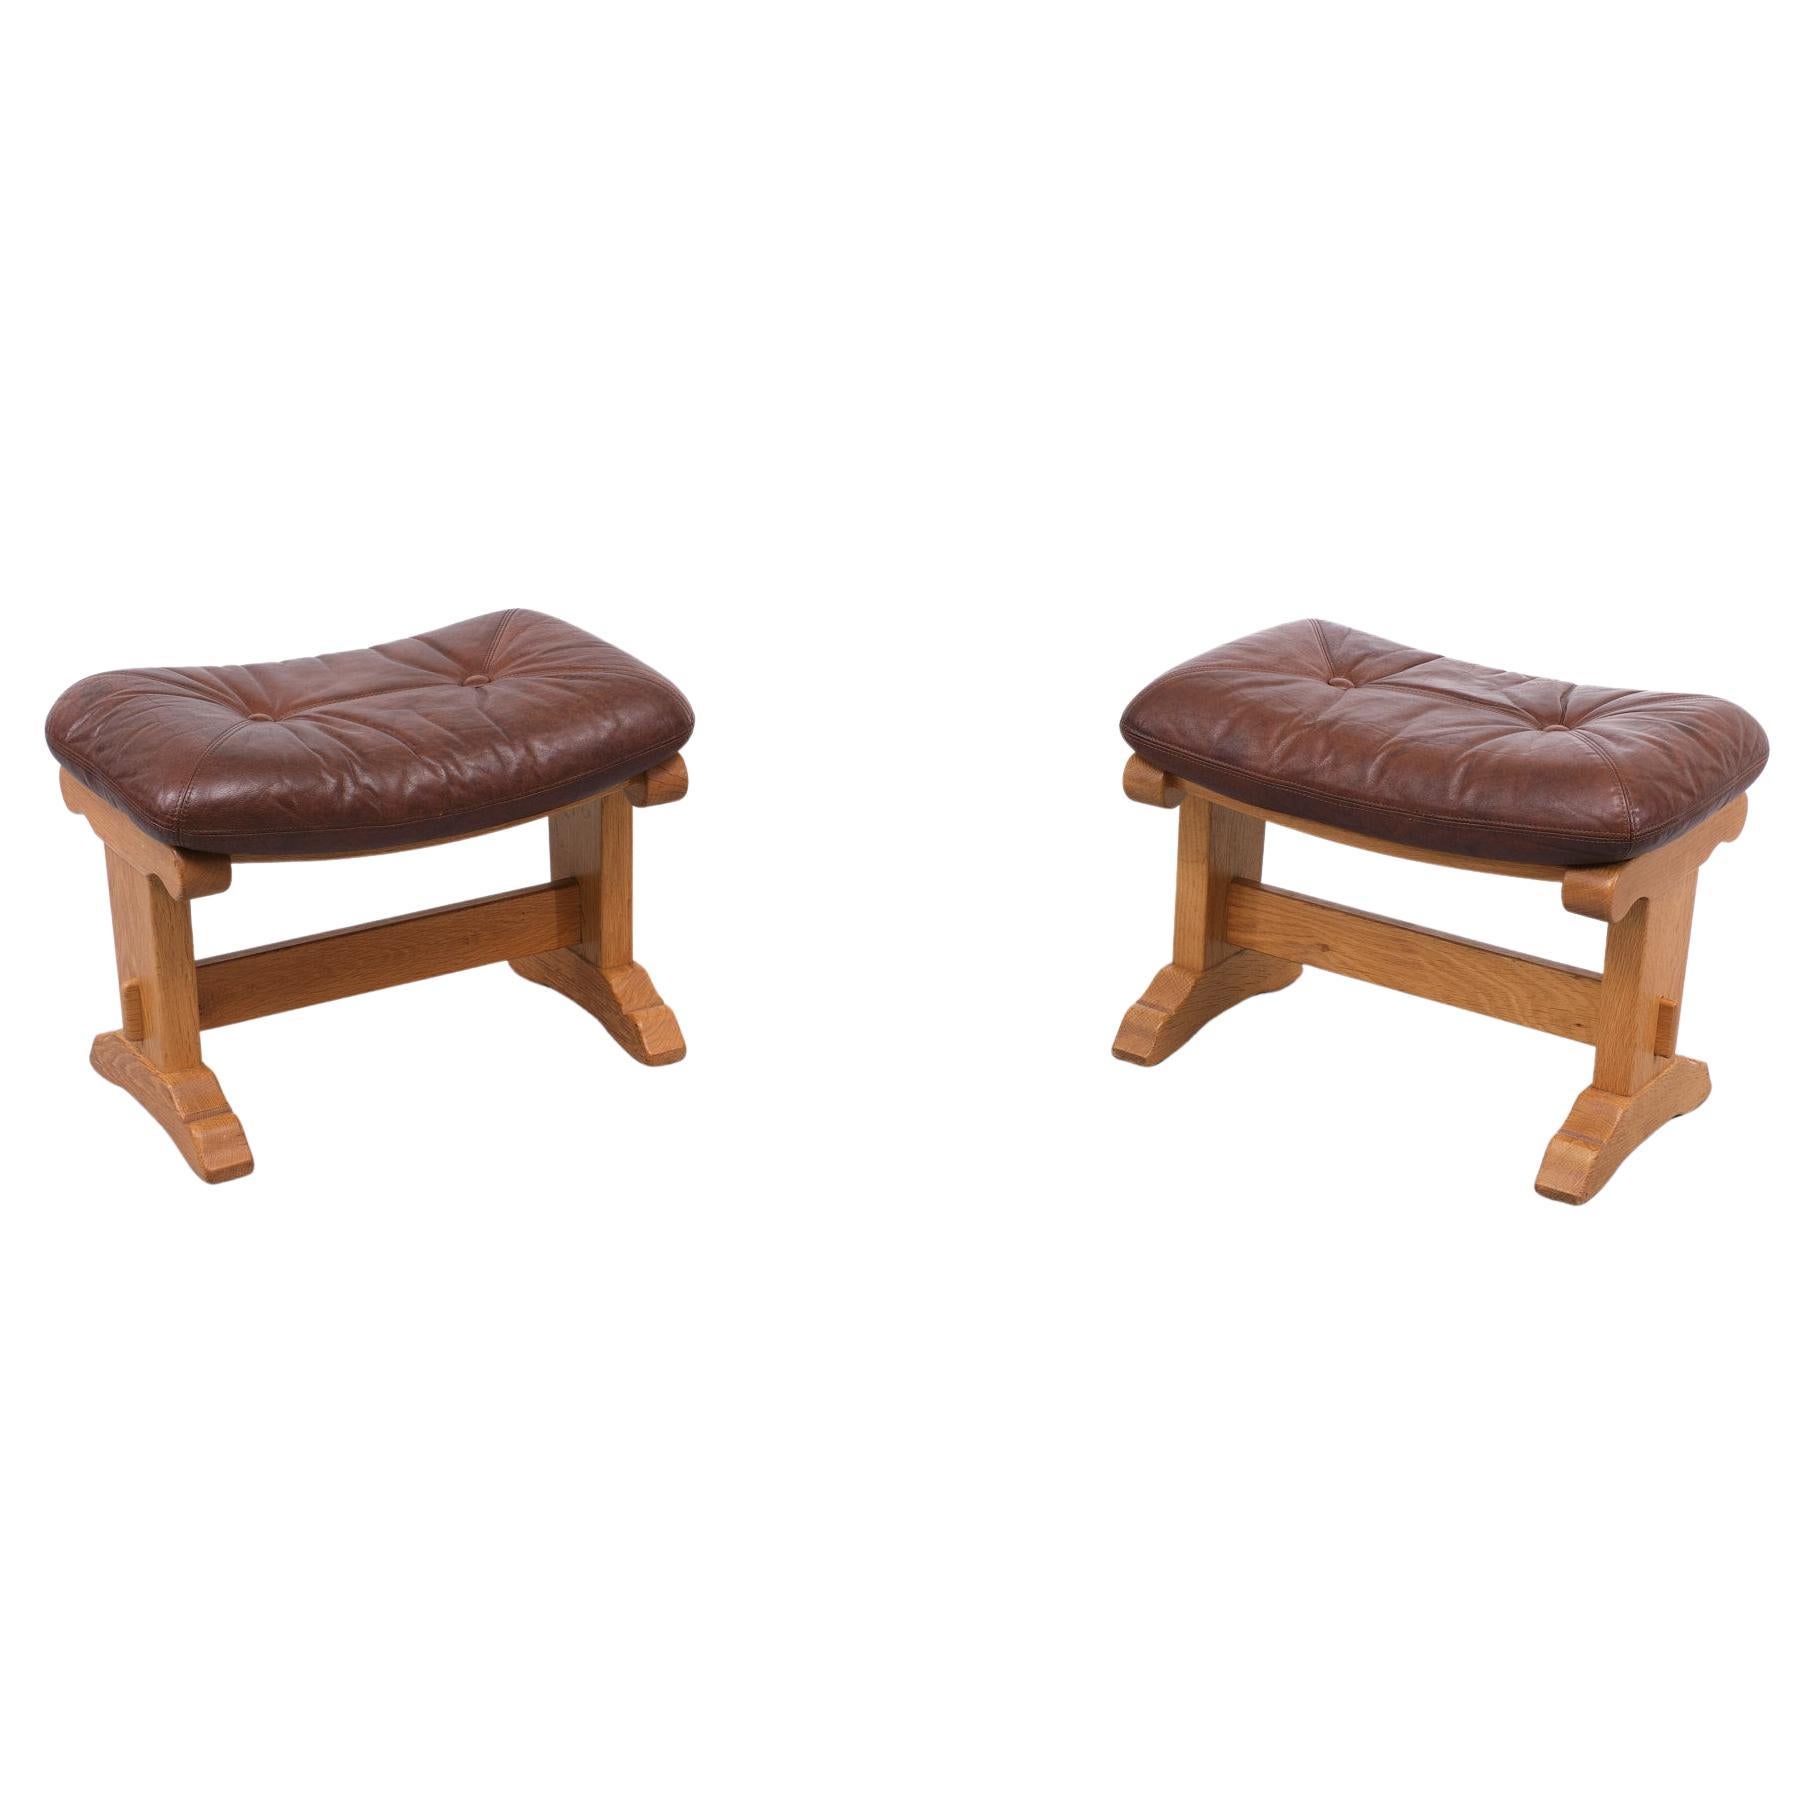 Two very nice foot stools, Made in solid oak, comes with a brown leather
upholstery. Manufactured and signed Meubelfabriek Oisterwijk Holland, 1970s.
There slogan was. Made to last forever. Indestructible. Good condition.